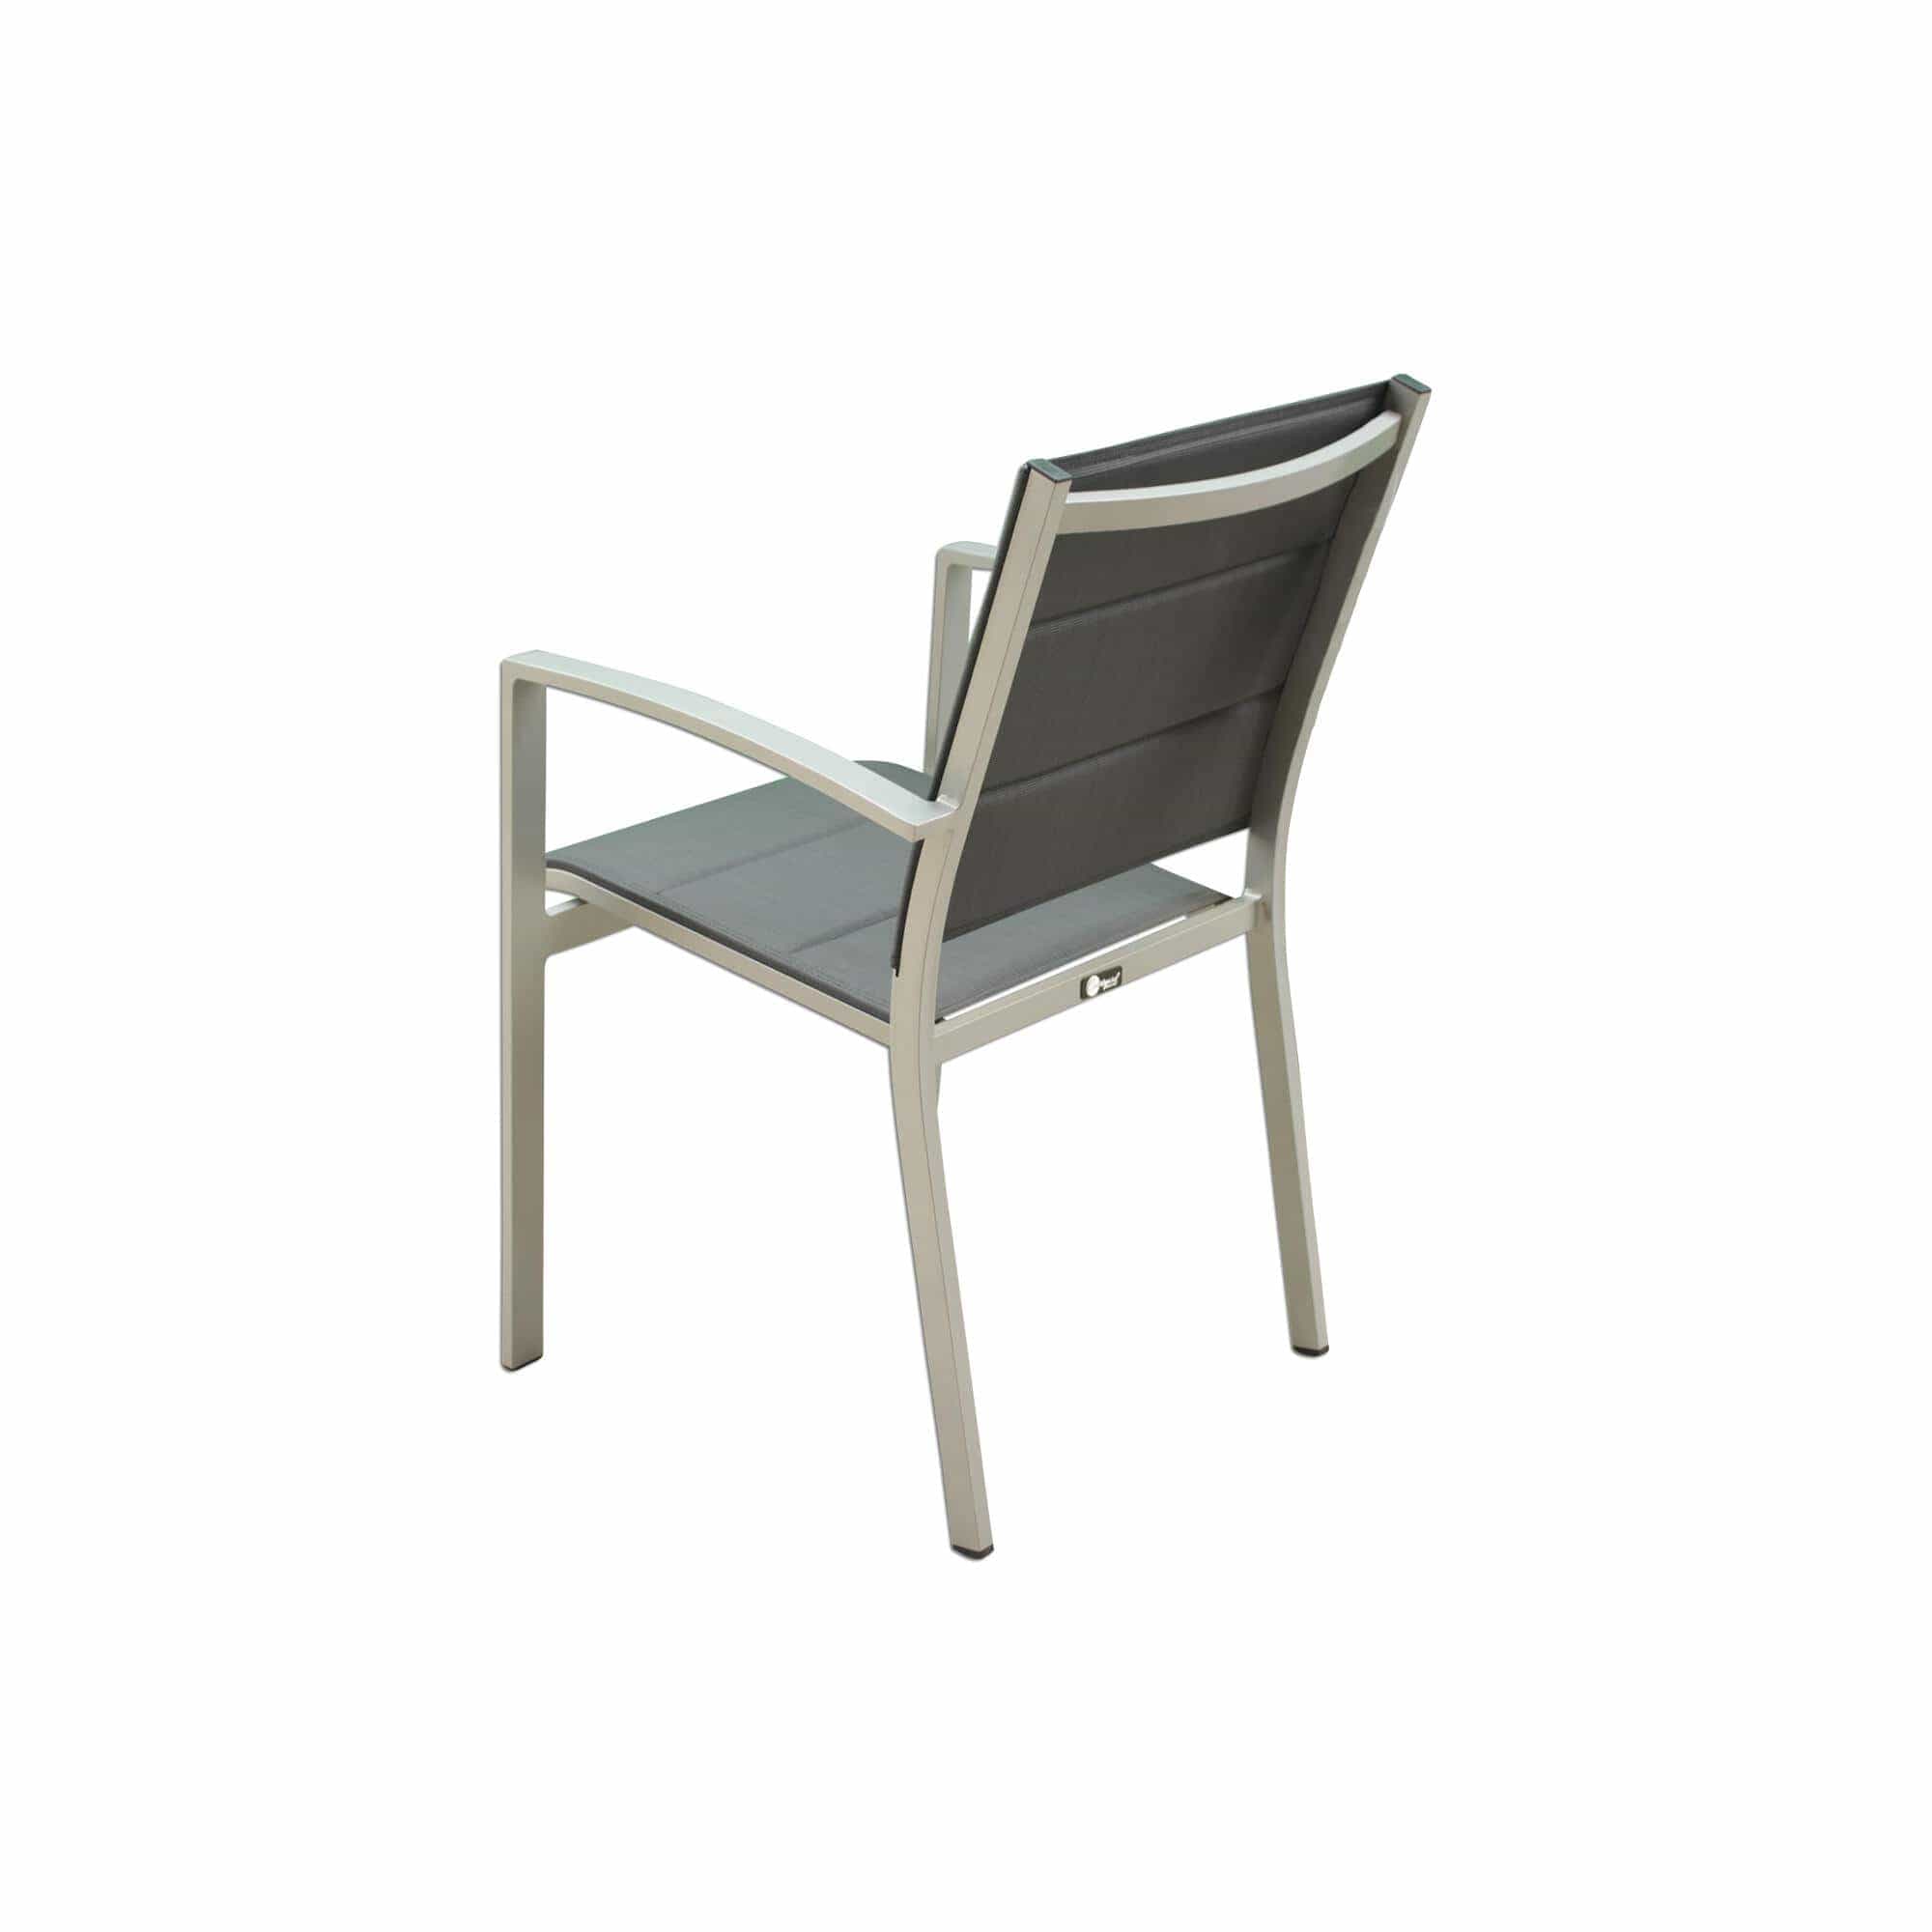 Courtyard Casual Outdoor Dining Chair Courtyard Casual -  Skyline Grey Aluminum Outdoor Padded Dining Chair, 4 pc Set | 5076